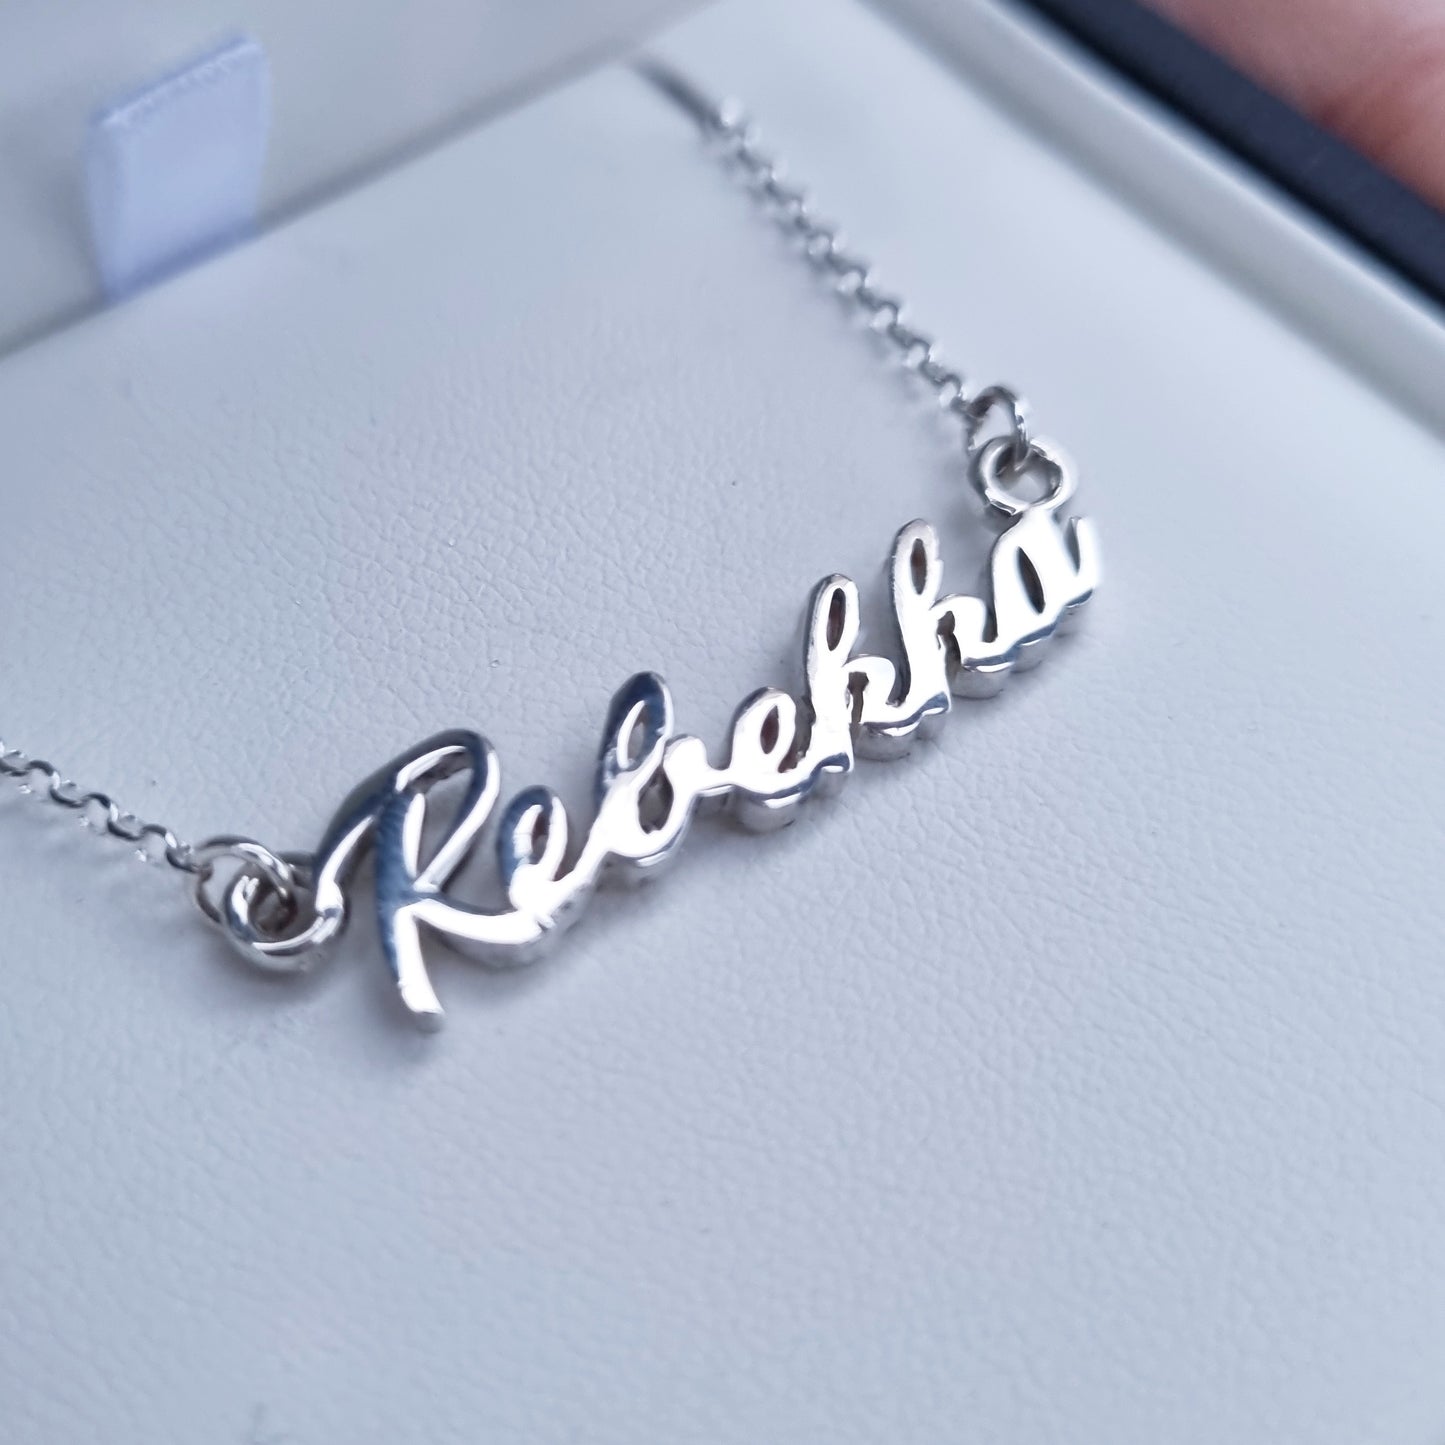 Name necklace - a name or word in silver script